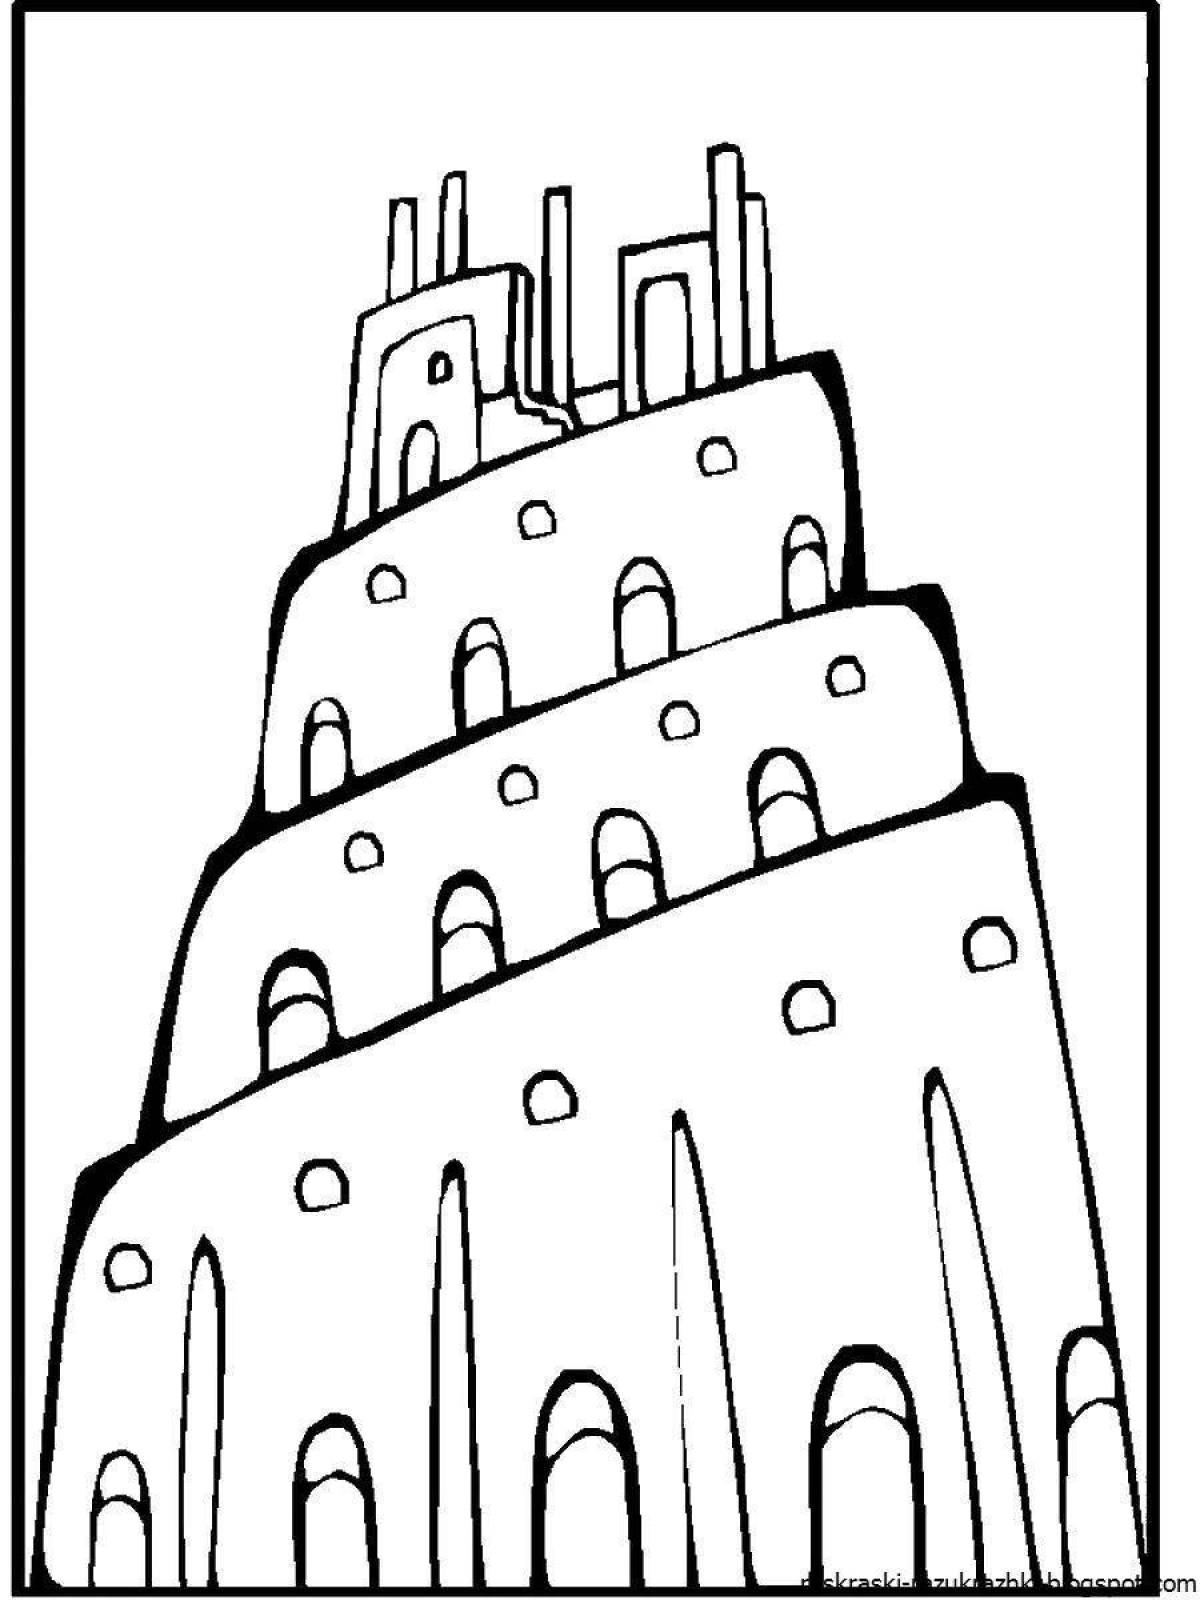 Ornate Tower of Babel coloring book